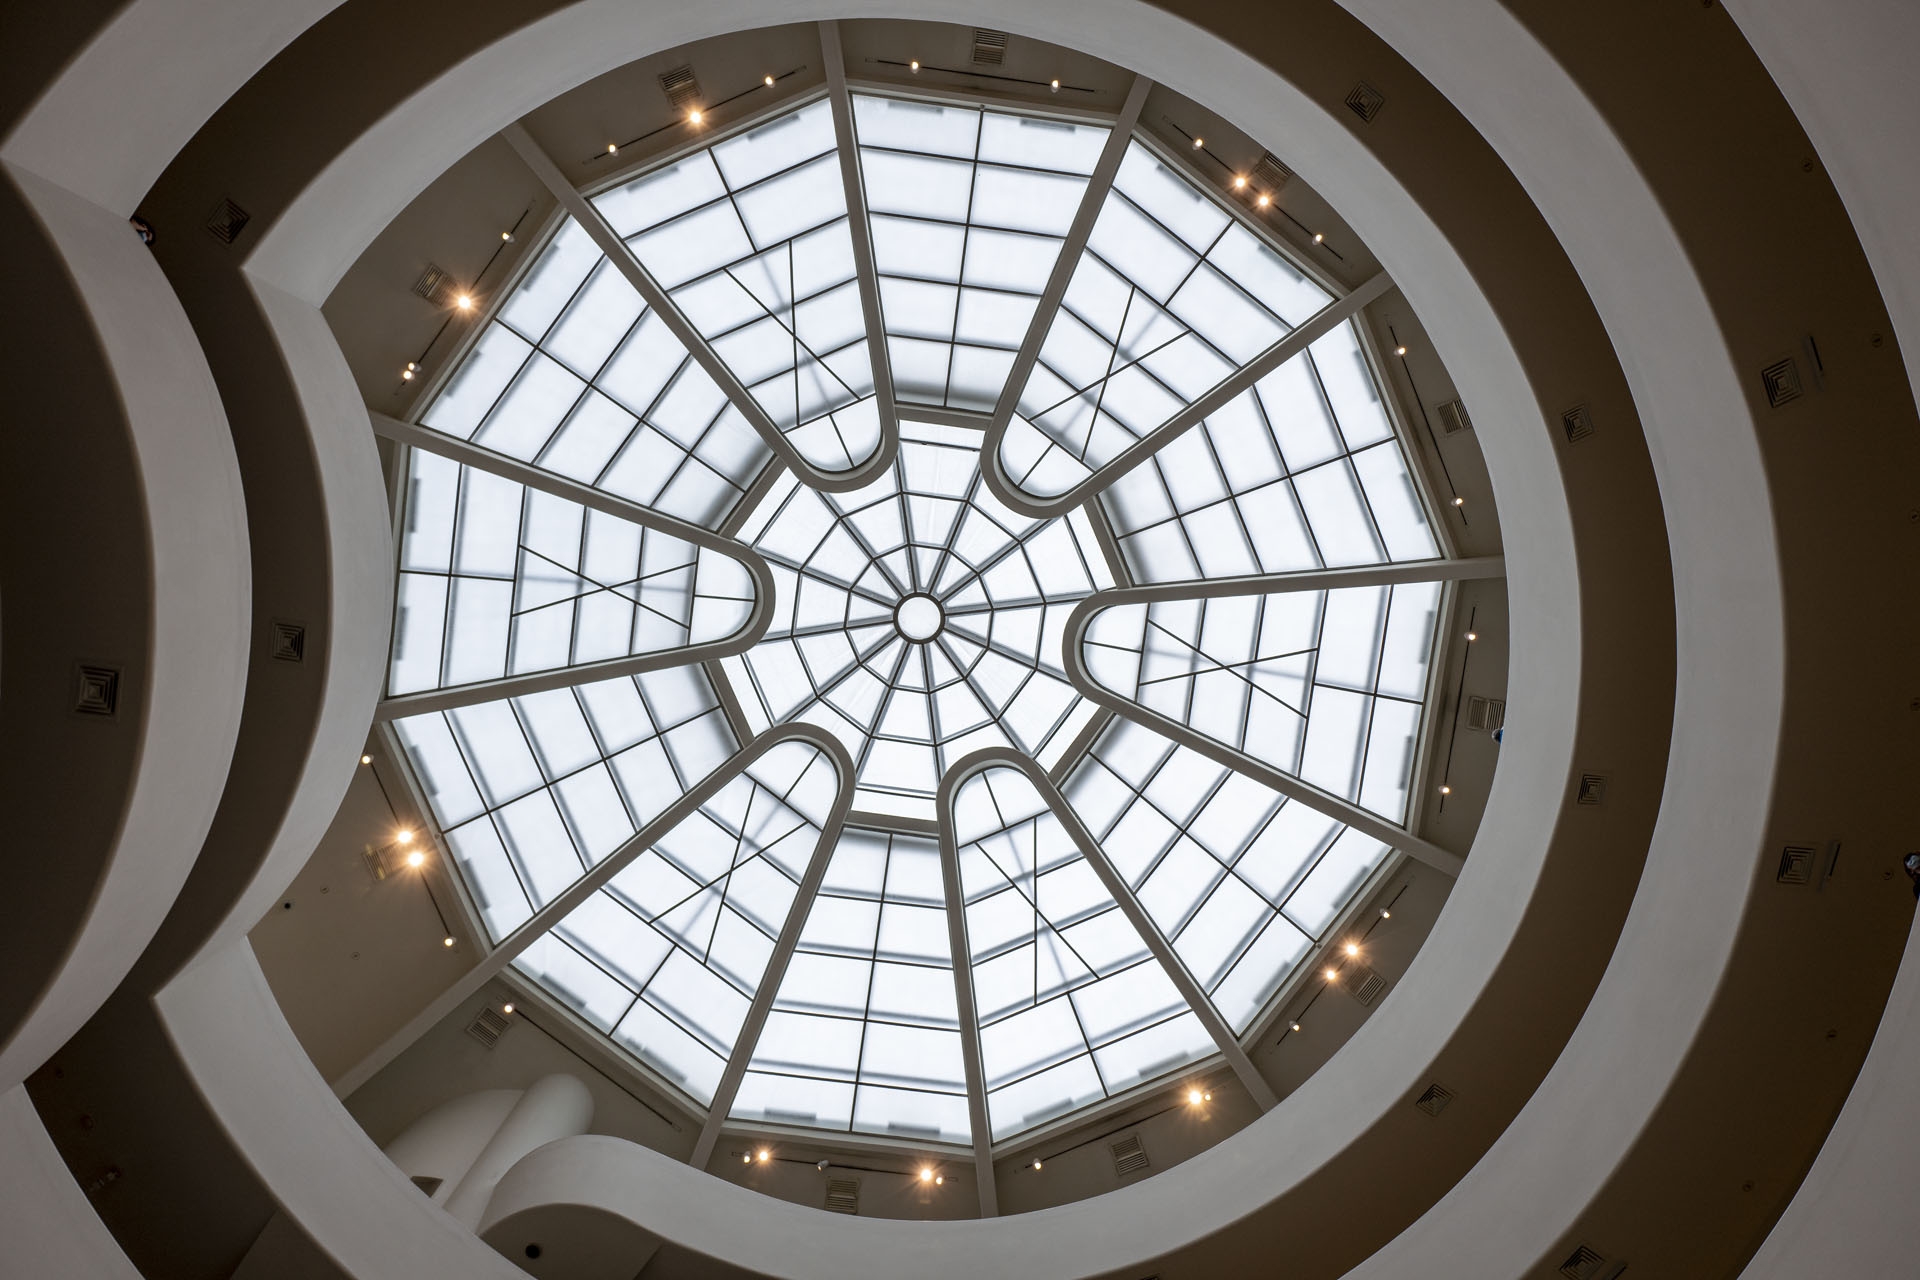 glass roof of the Guggenheim Museums in New York